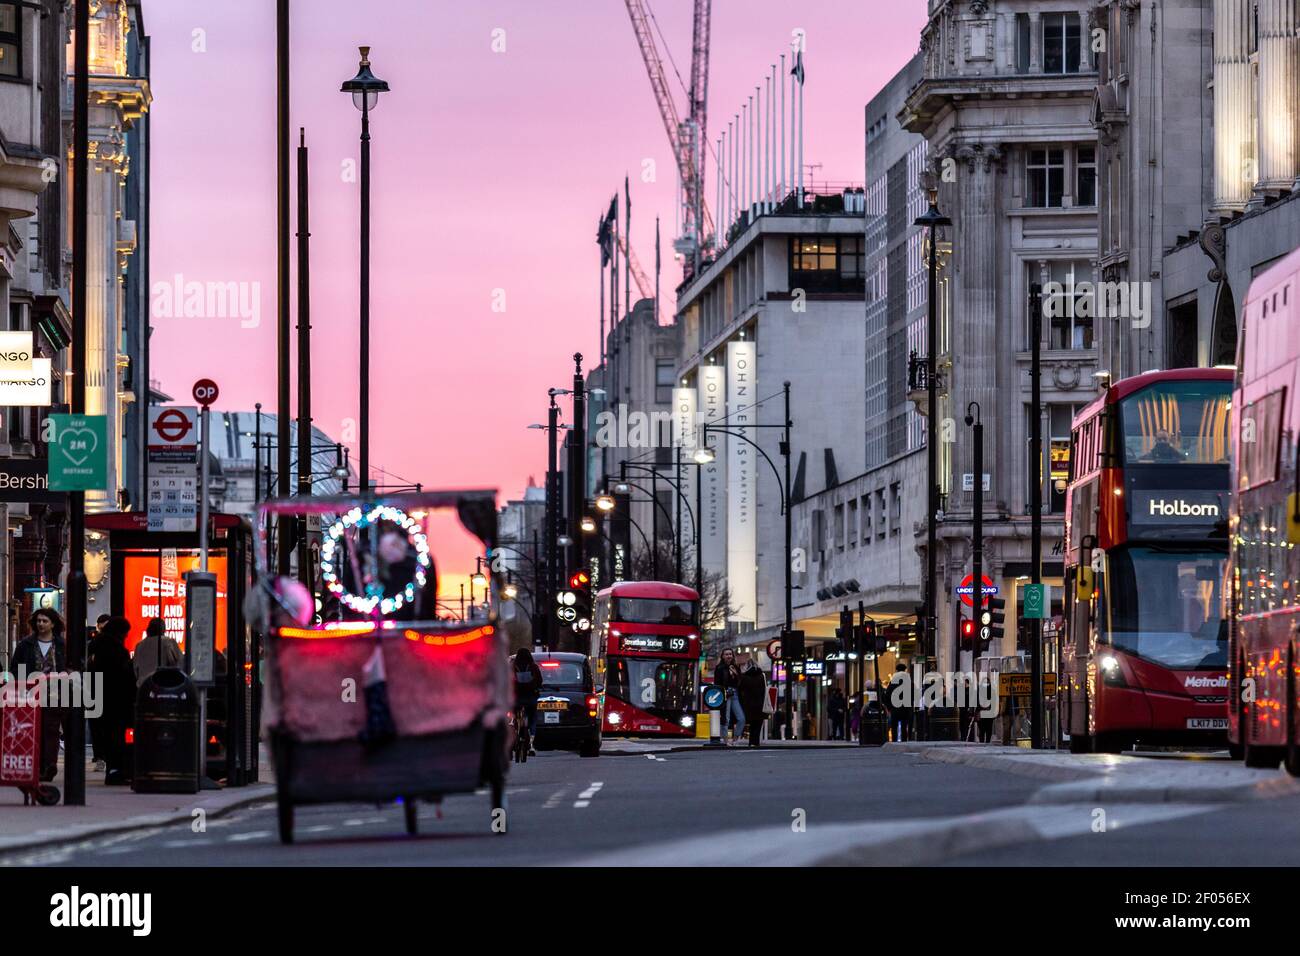 London, UK, March 6, 2021. Commuters cross Oxford Street as the sun sets over largely empty street during an ongoing third Coronavirus lockdown. Oxford Street is usually busy with crowds of shoppers. The Prime Minister Boris Johnson has set a road map on easing the restrictions. Credit: Dominika Zarzycka/Alamy Live News Stock Photo